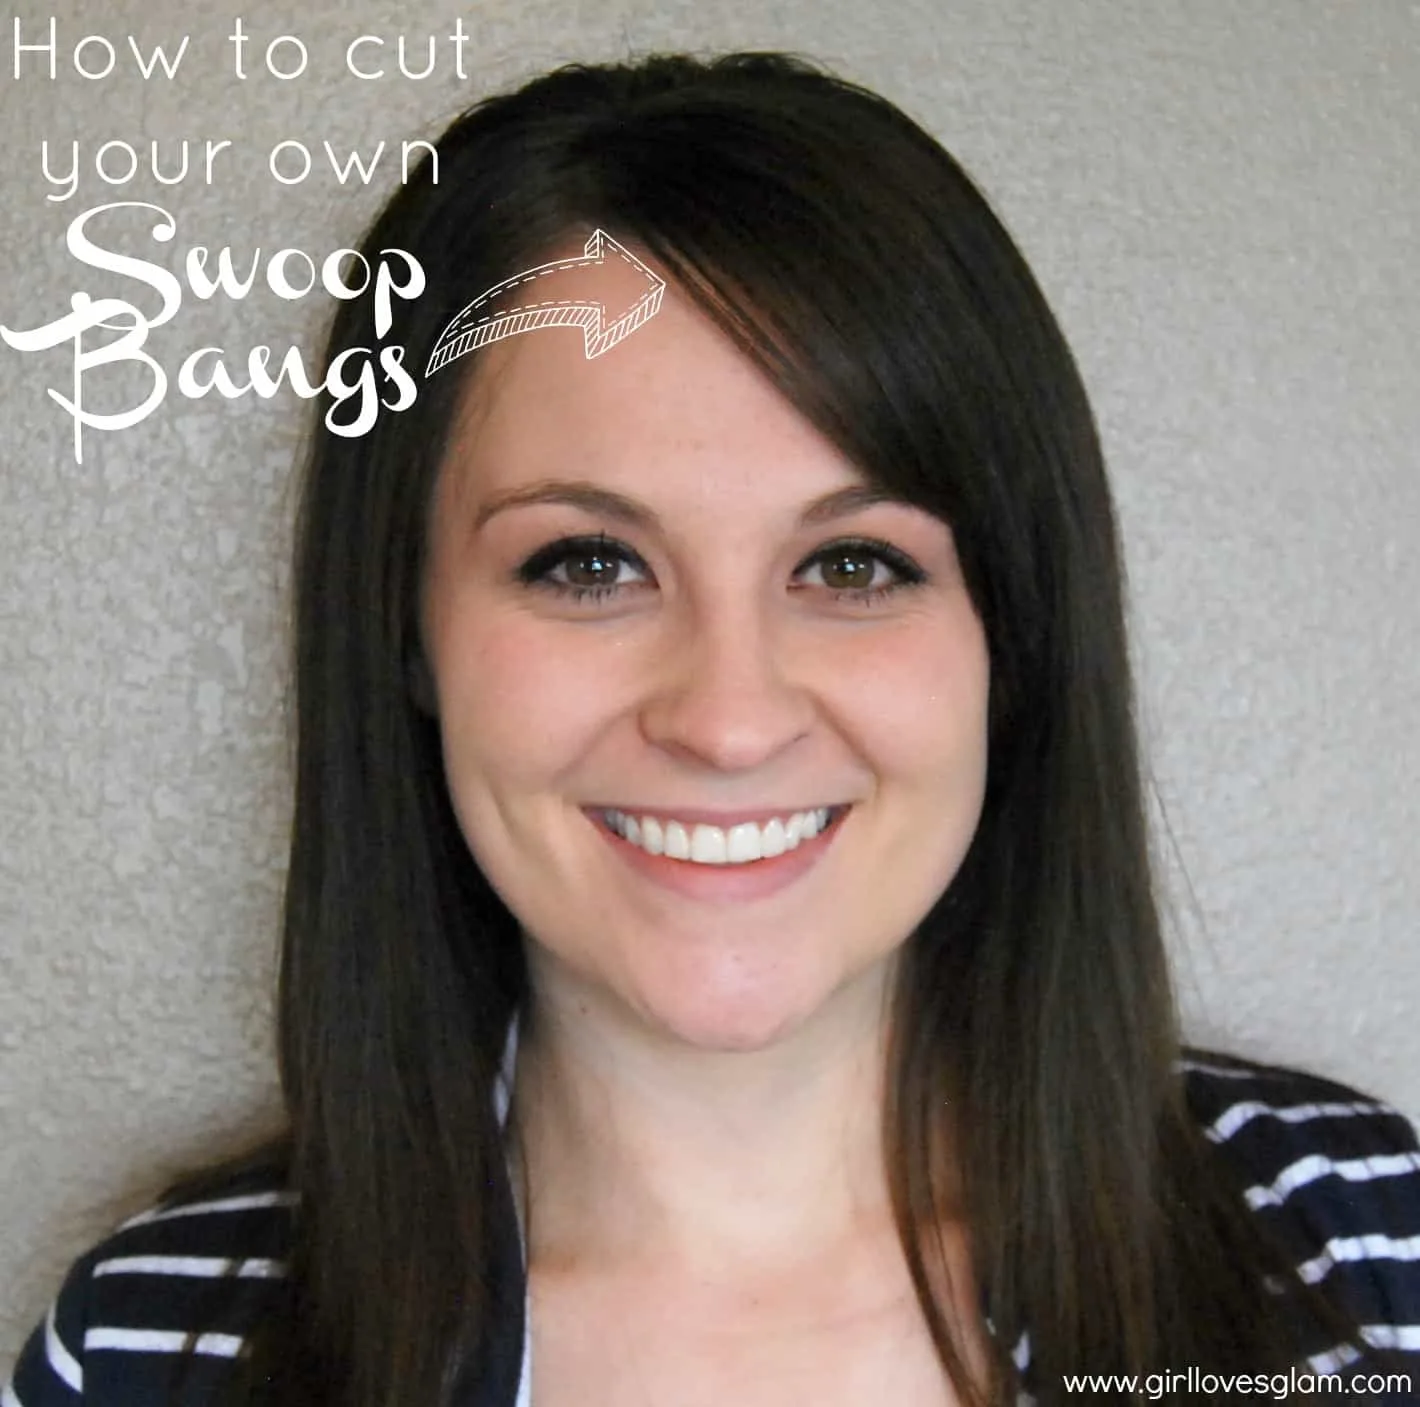 How to cut your own side swoop bangs at home on www.girllovesglam.com #diy #hair #cut #tutorial